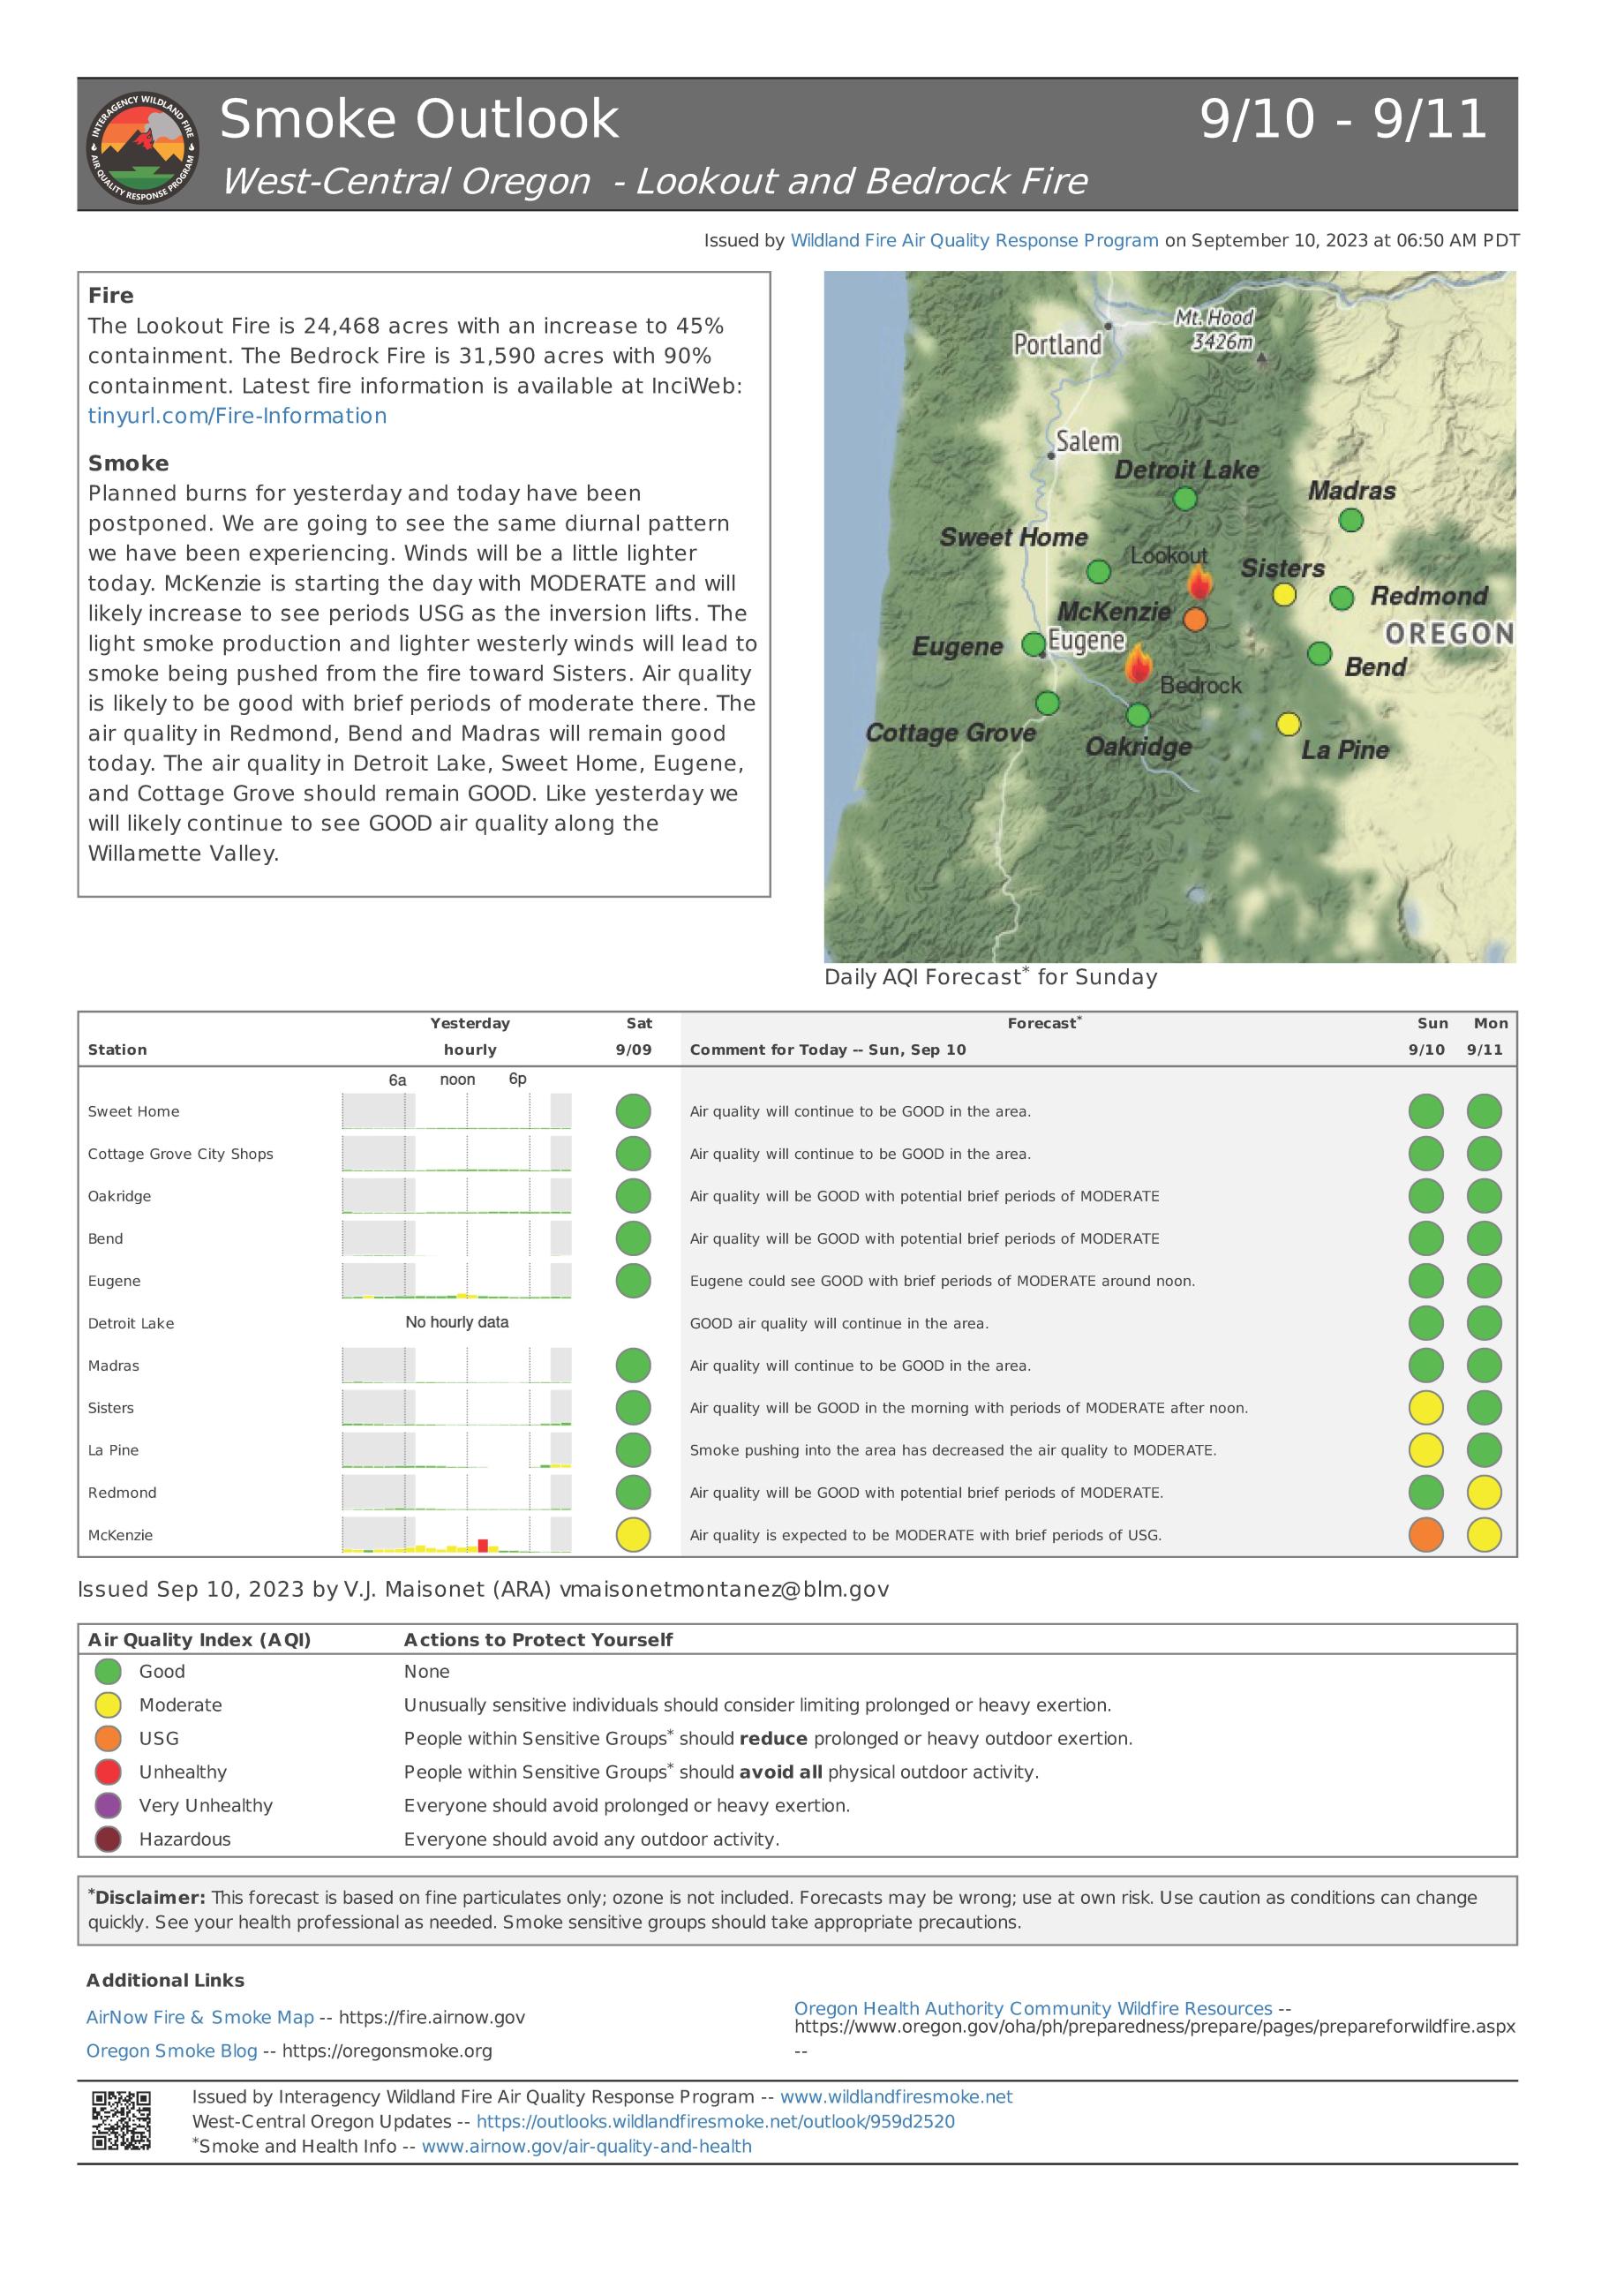 Smoke Outlook Document for the Bedrock Fire